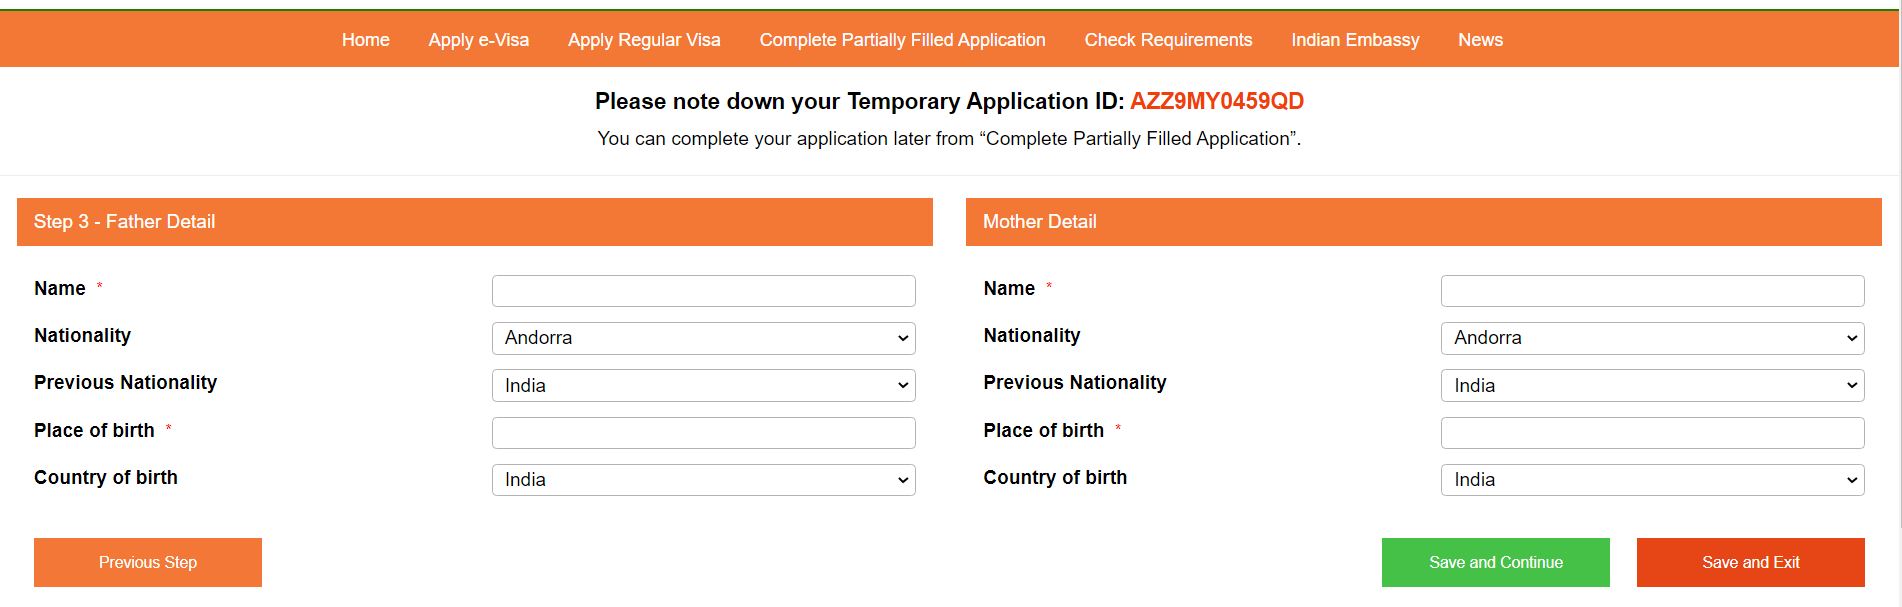 Indian visa form, provide applicant father and mother details